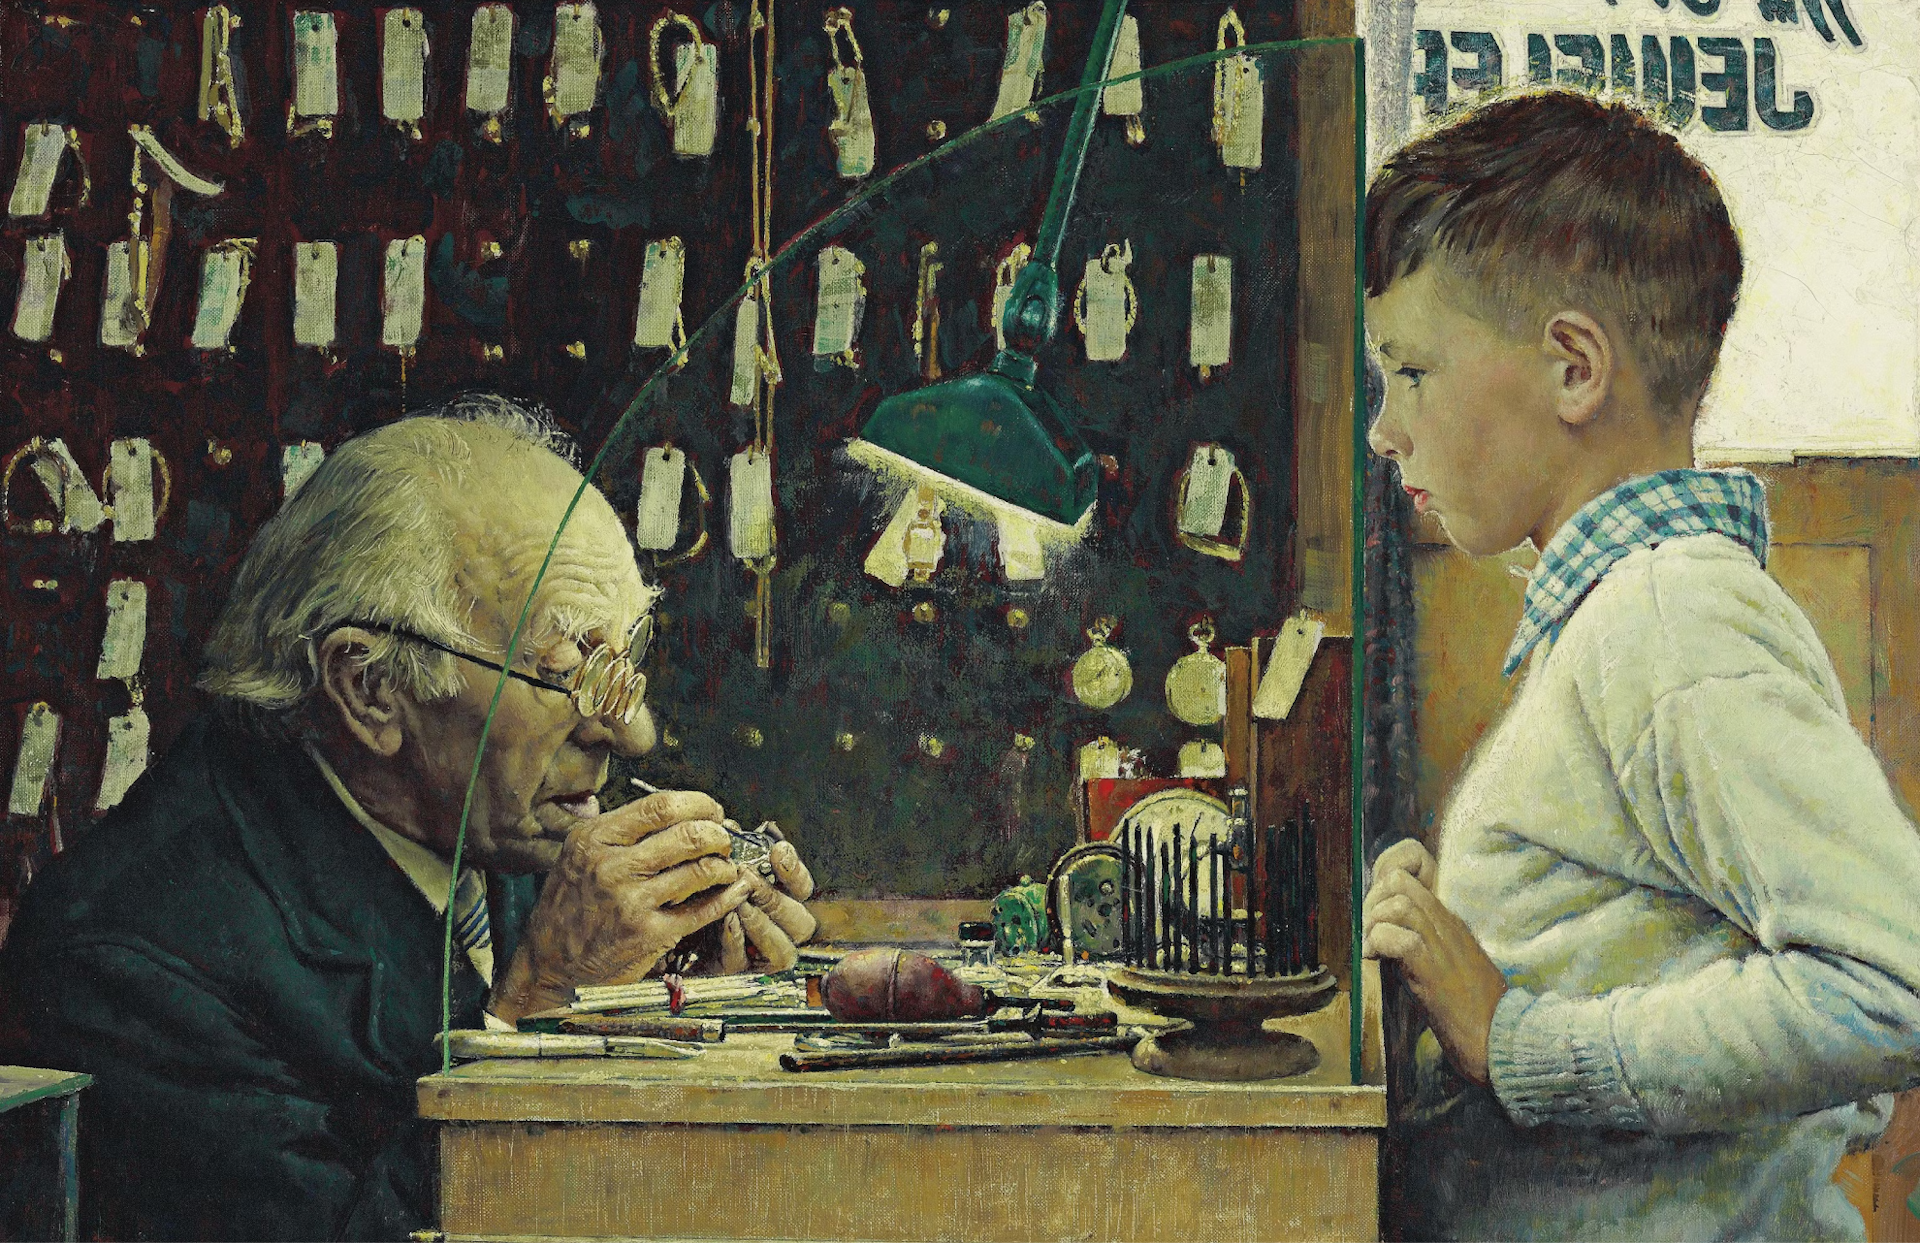 Norman Rockwell (American, 1894-1978), What Makes It Tick?, alternatively known as The Watchmaker, 1948, Oil on canvas, 66.7 x 66 cm. *Image source: Christie’s. Original image copyright: Norman Rockwell.*